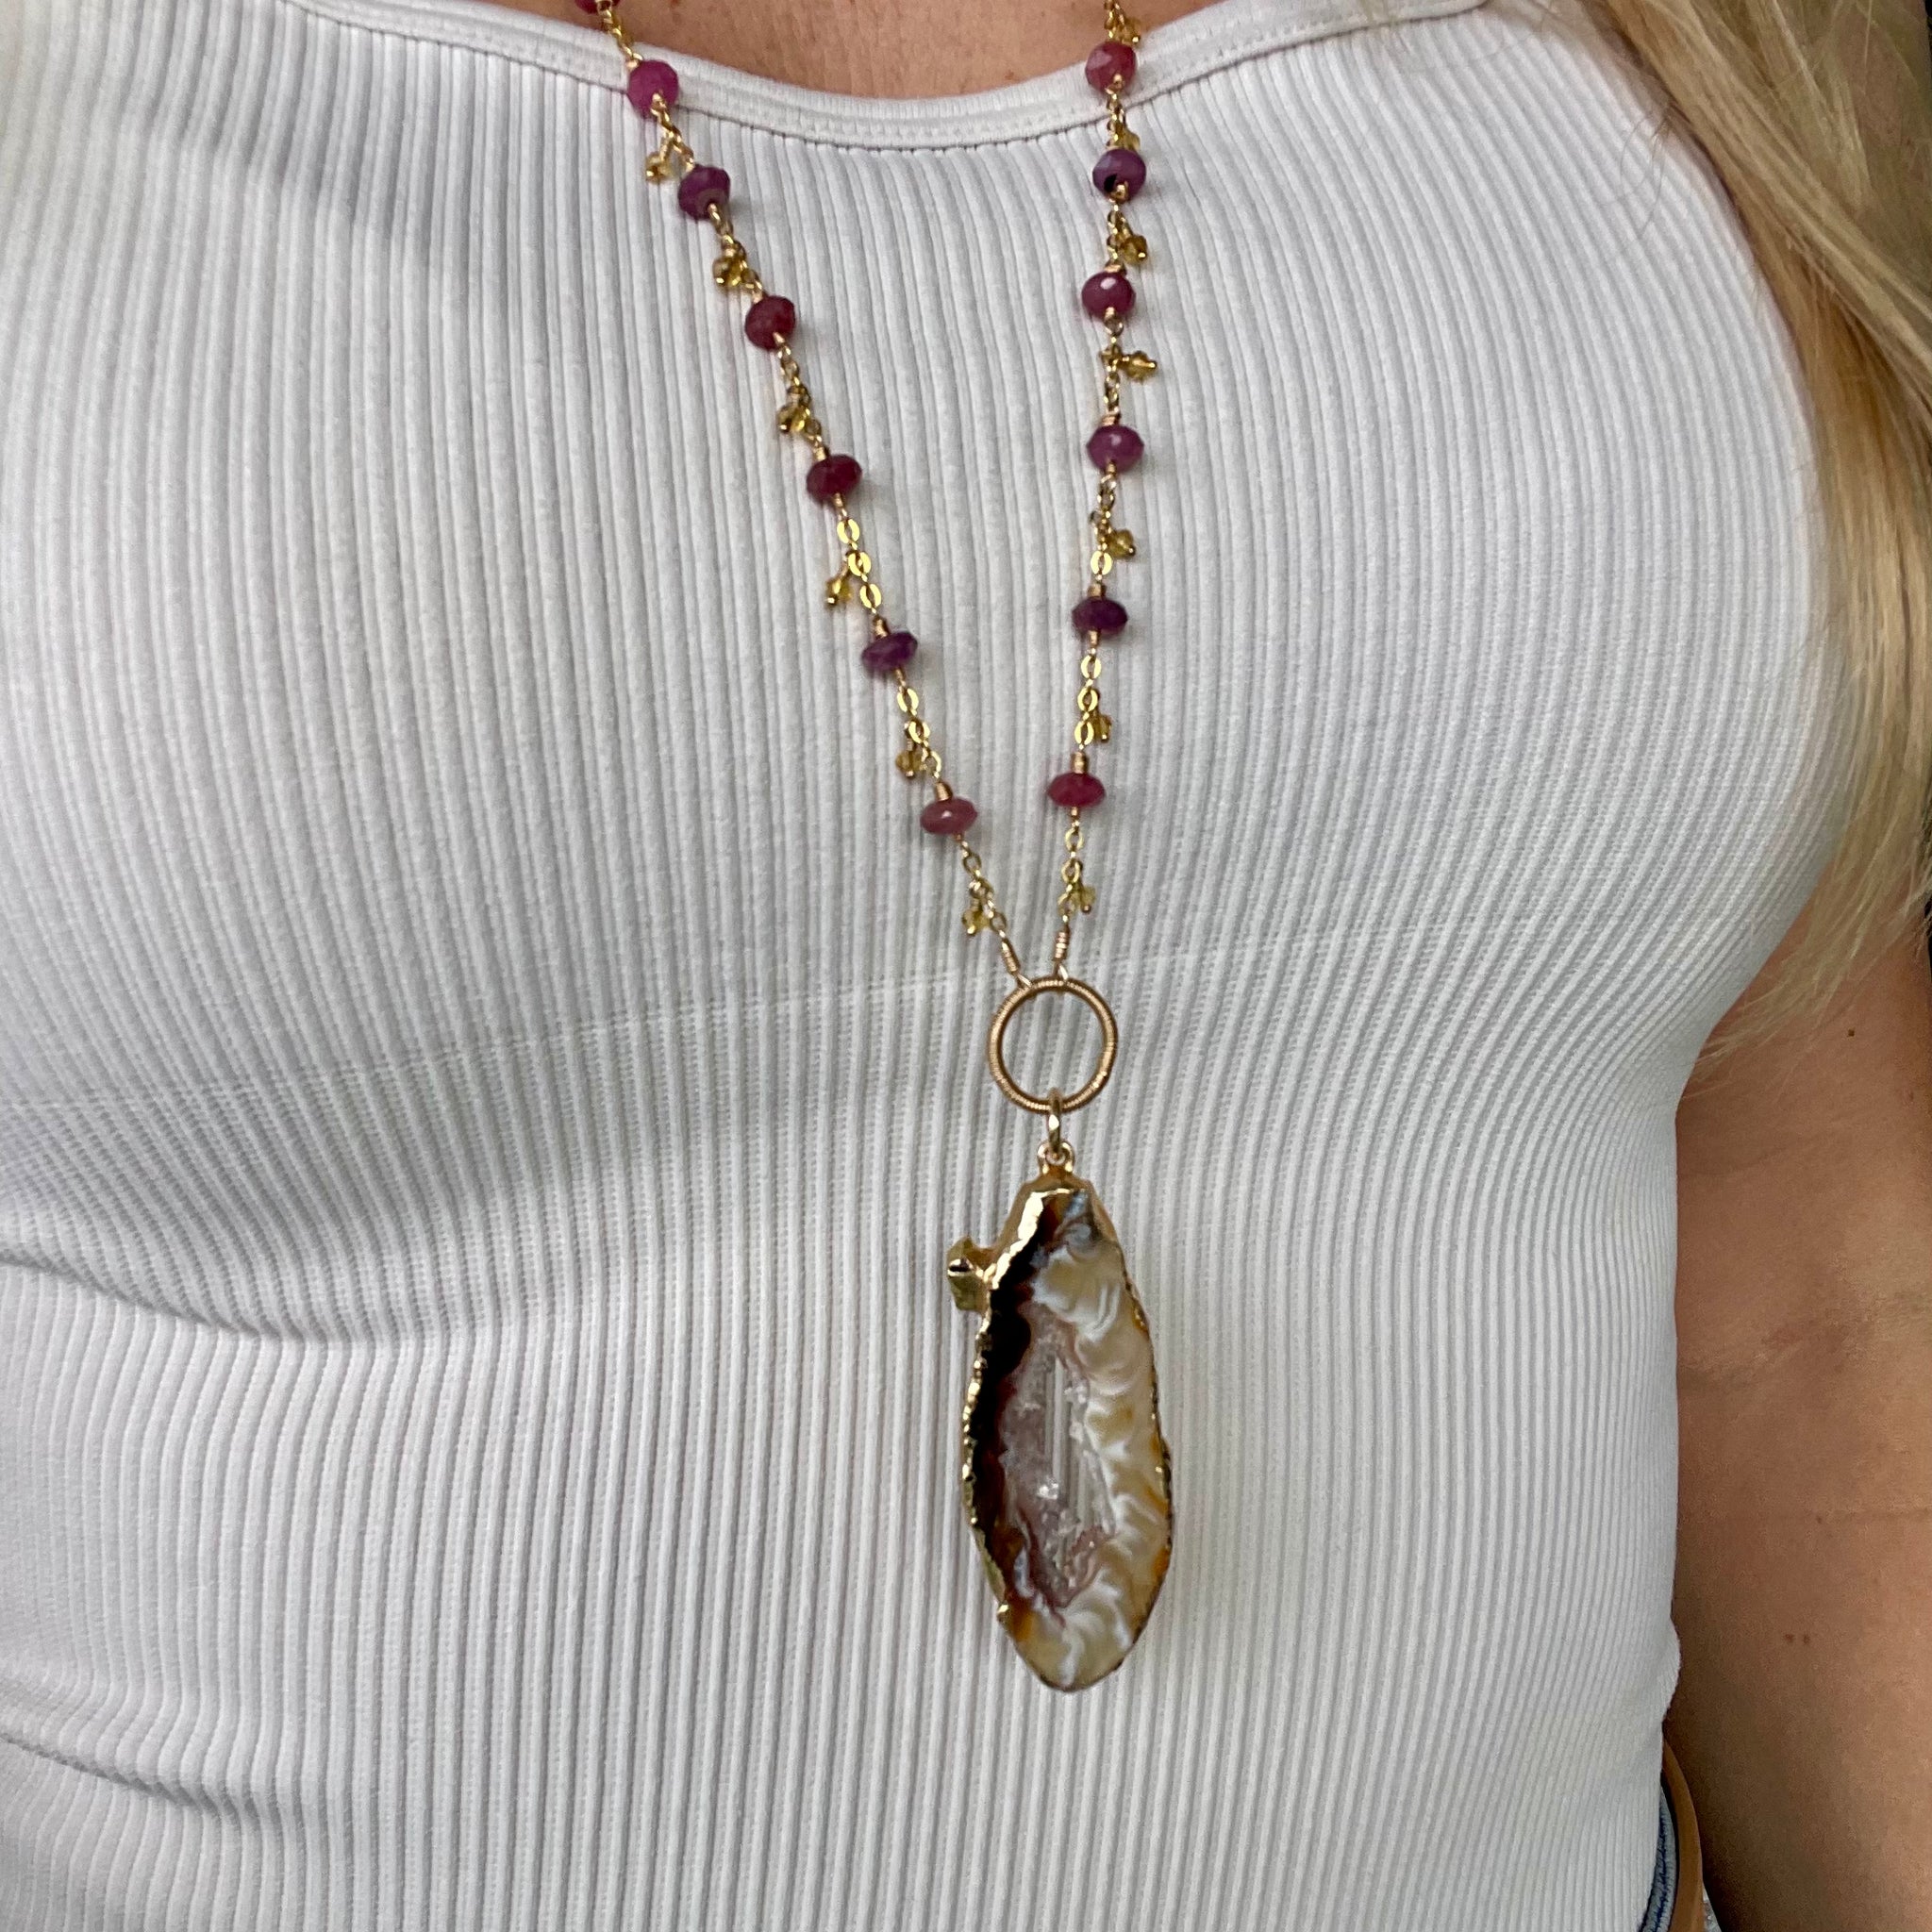 1673 - One of a Kind Gemstone Necklace